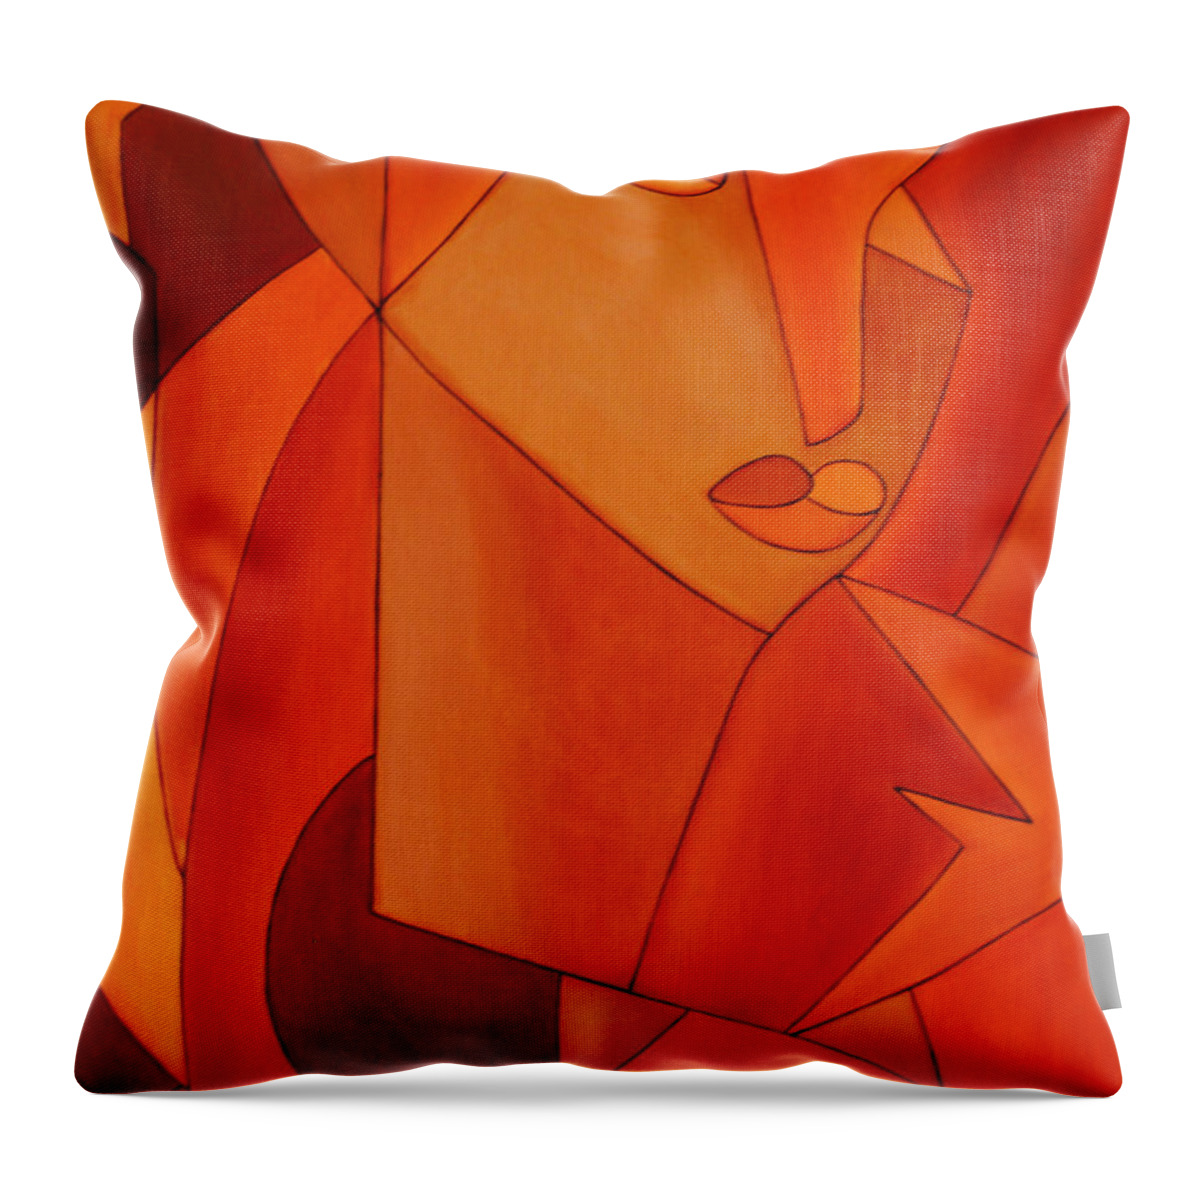 Oil Throw Pillow featuring the painting The Look by Sonali Kukreja